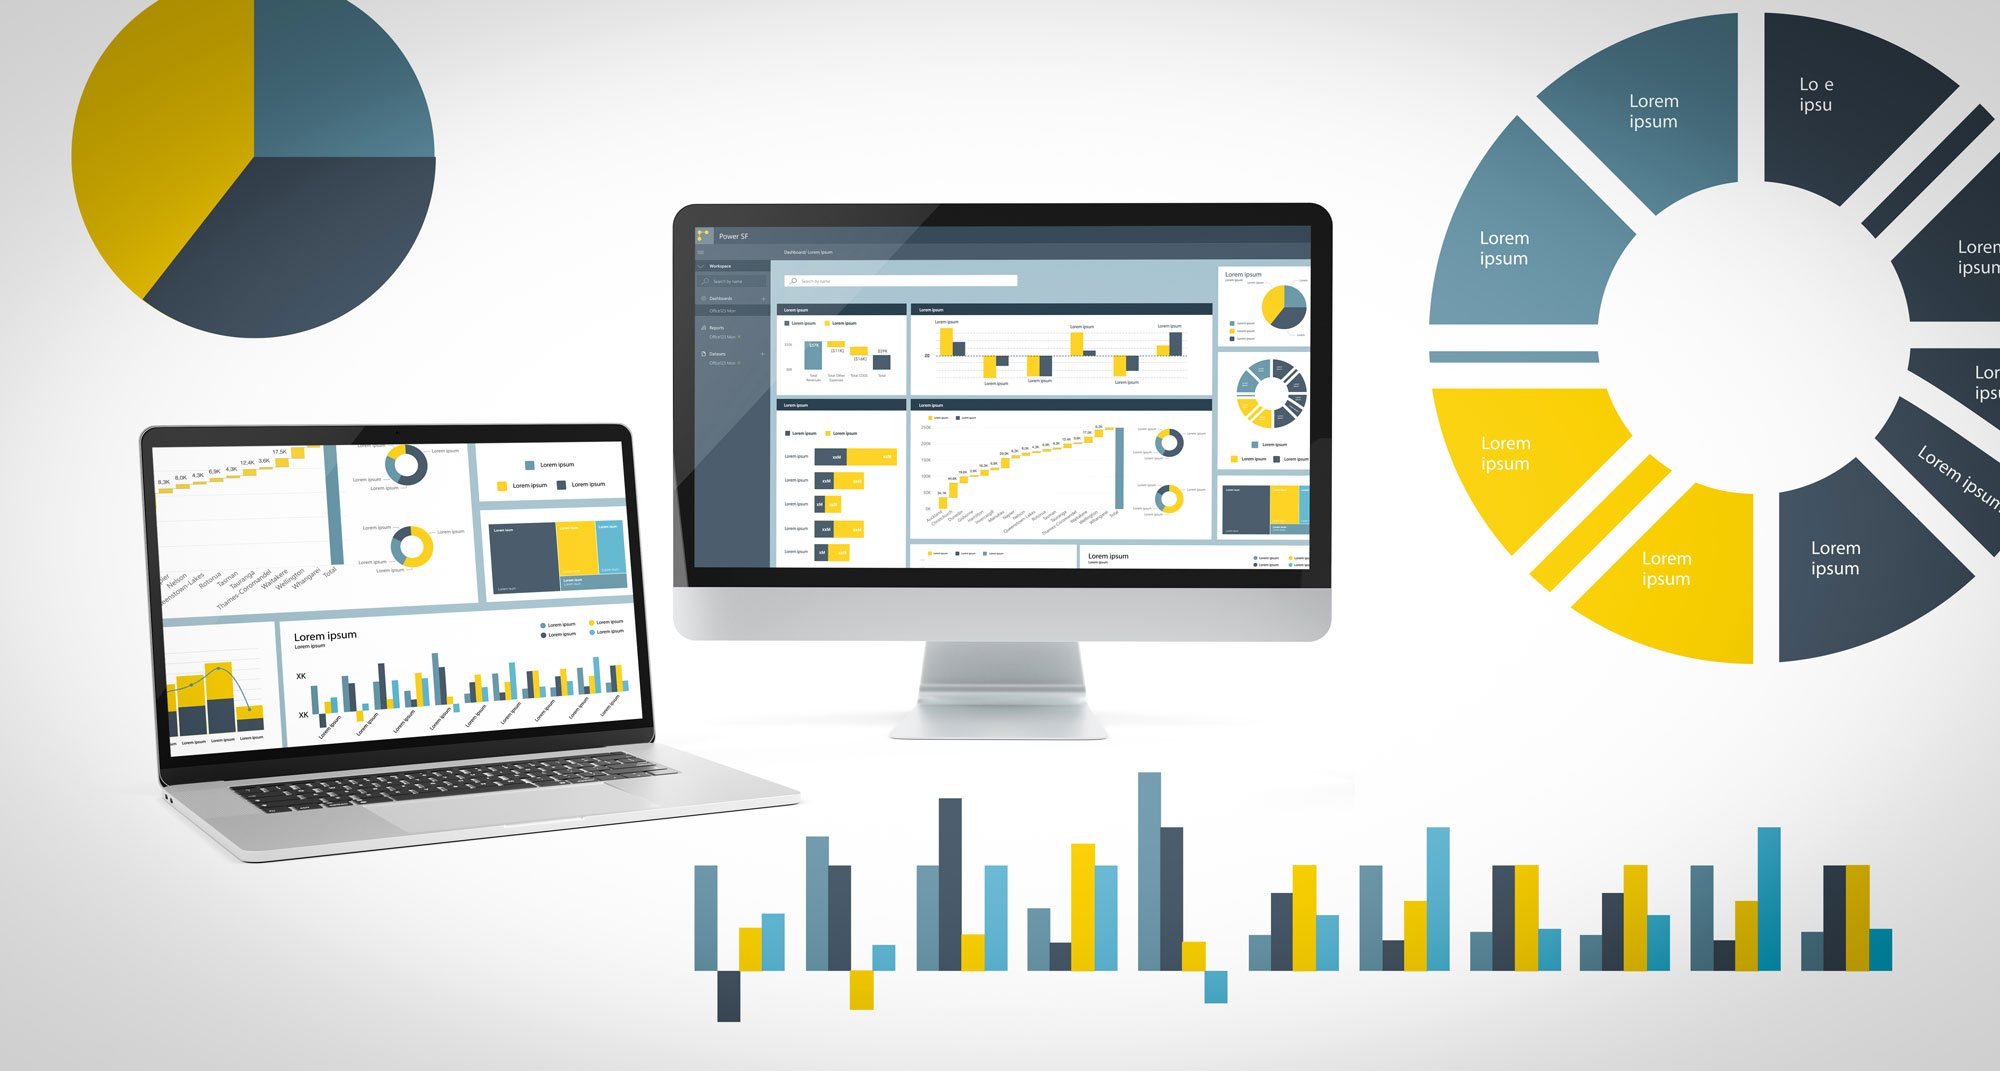 Power BI produces concise reports for both large and small business needs.